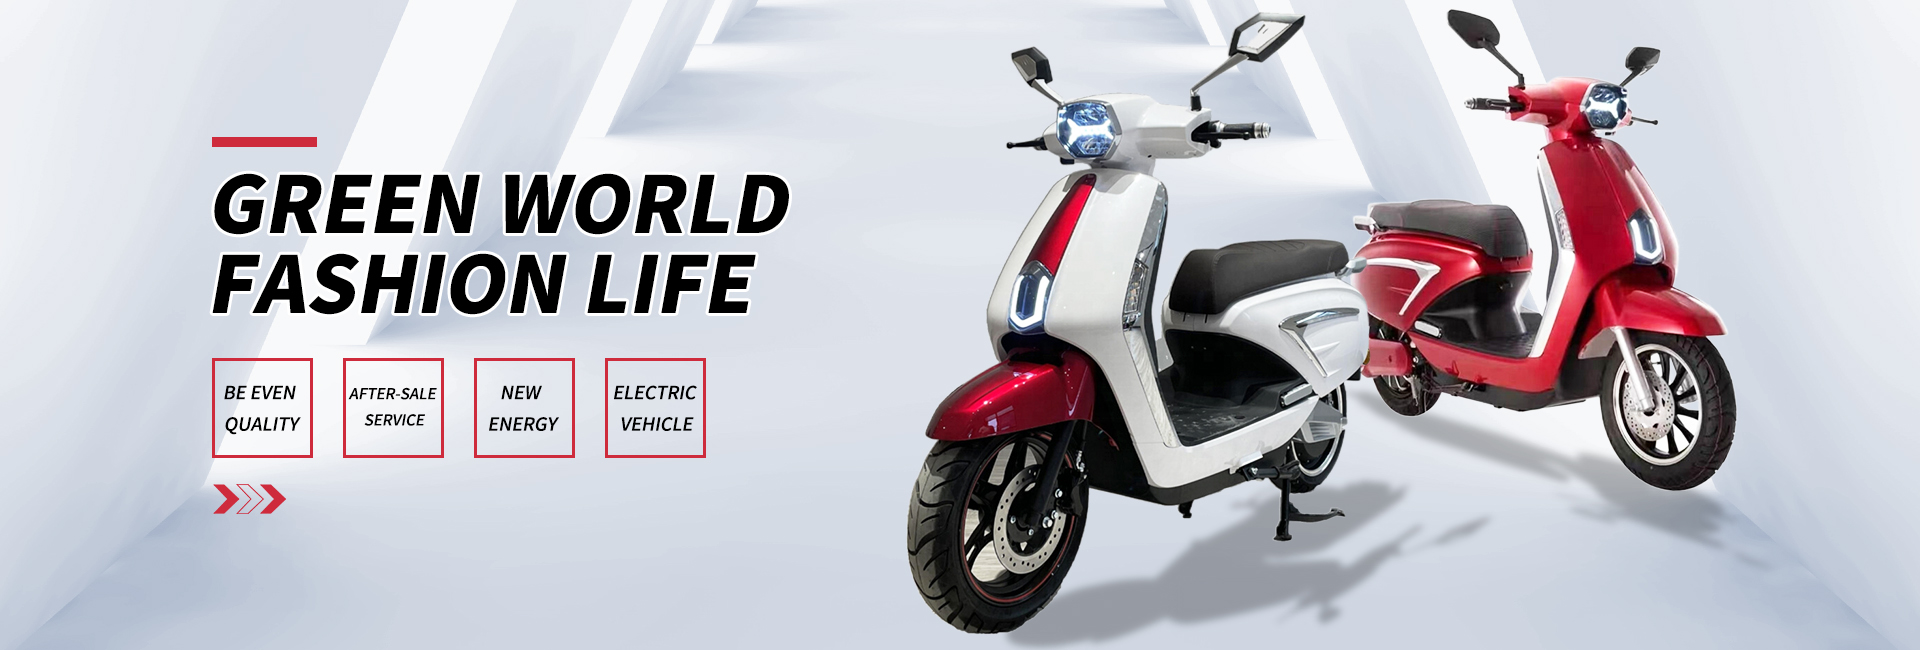 Electric vehicles, Electric motorcycle, Electric scooter, Battery